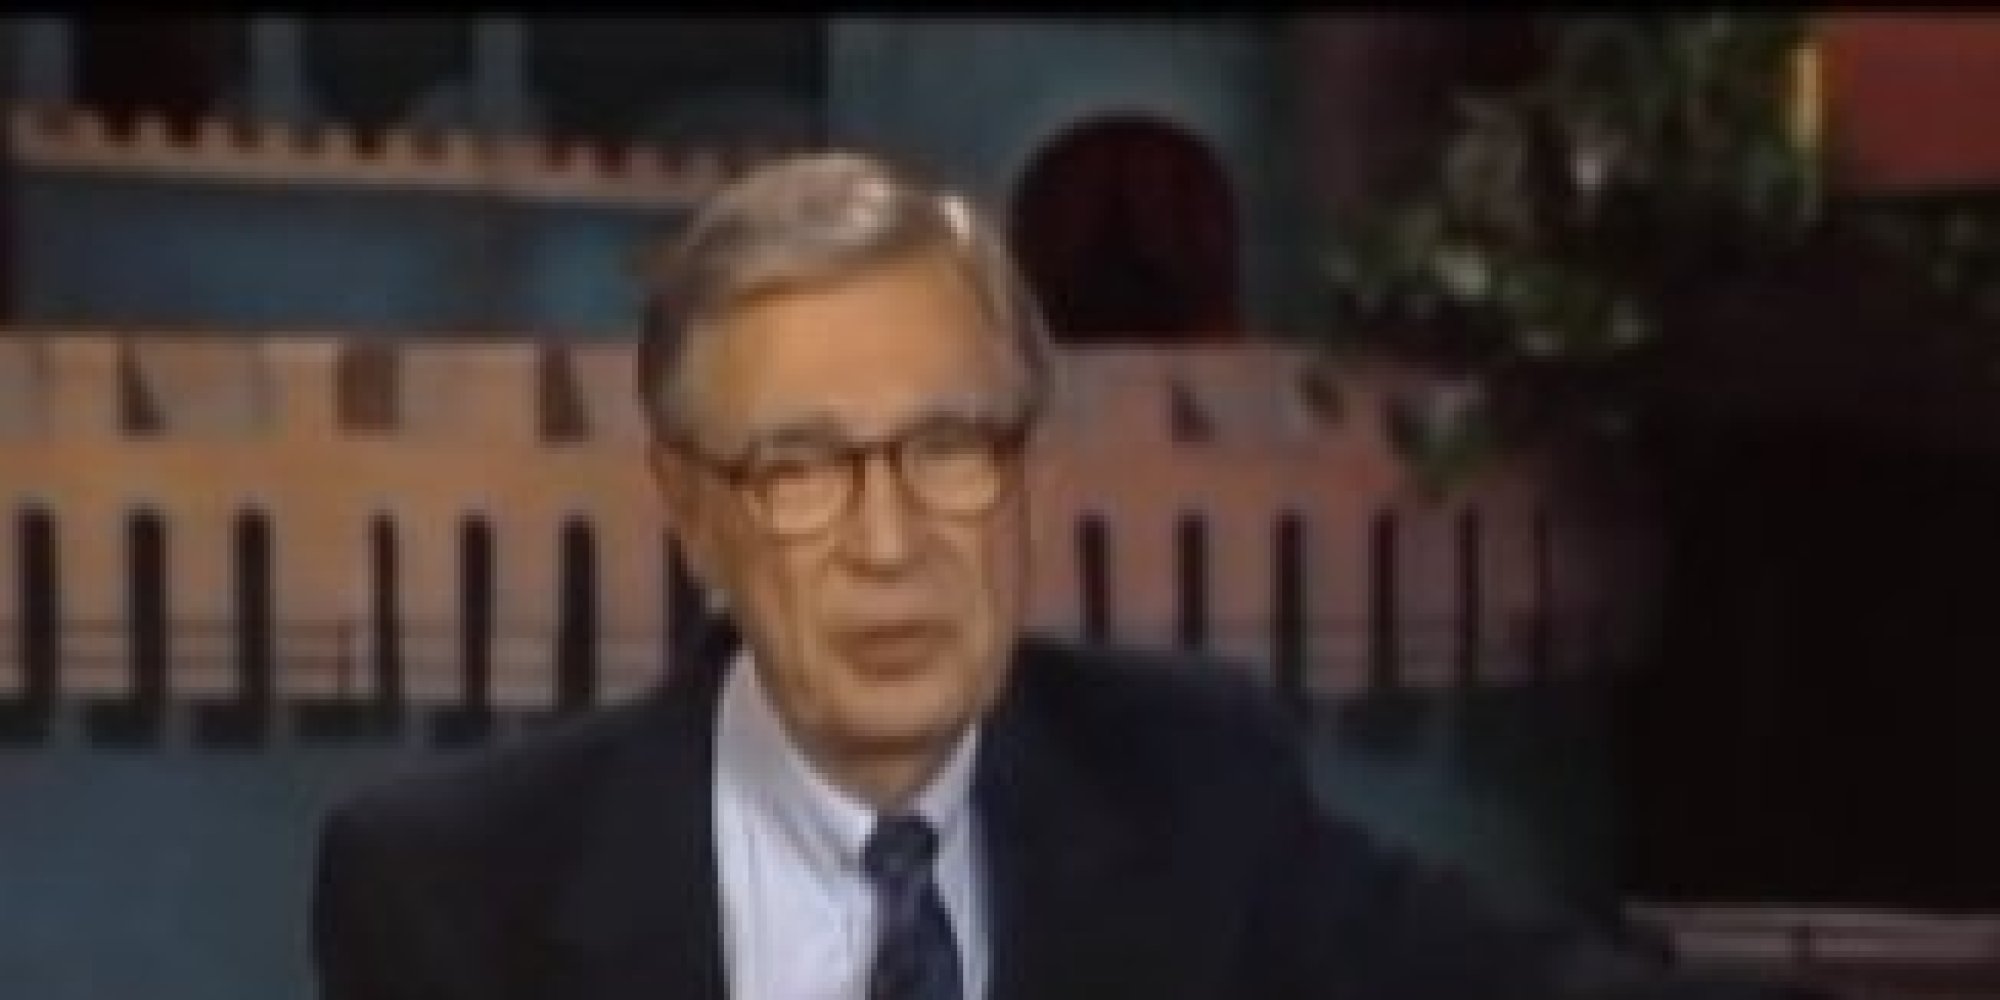 Mister Rogers' Advice For When Times Get Tough